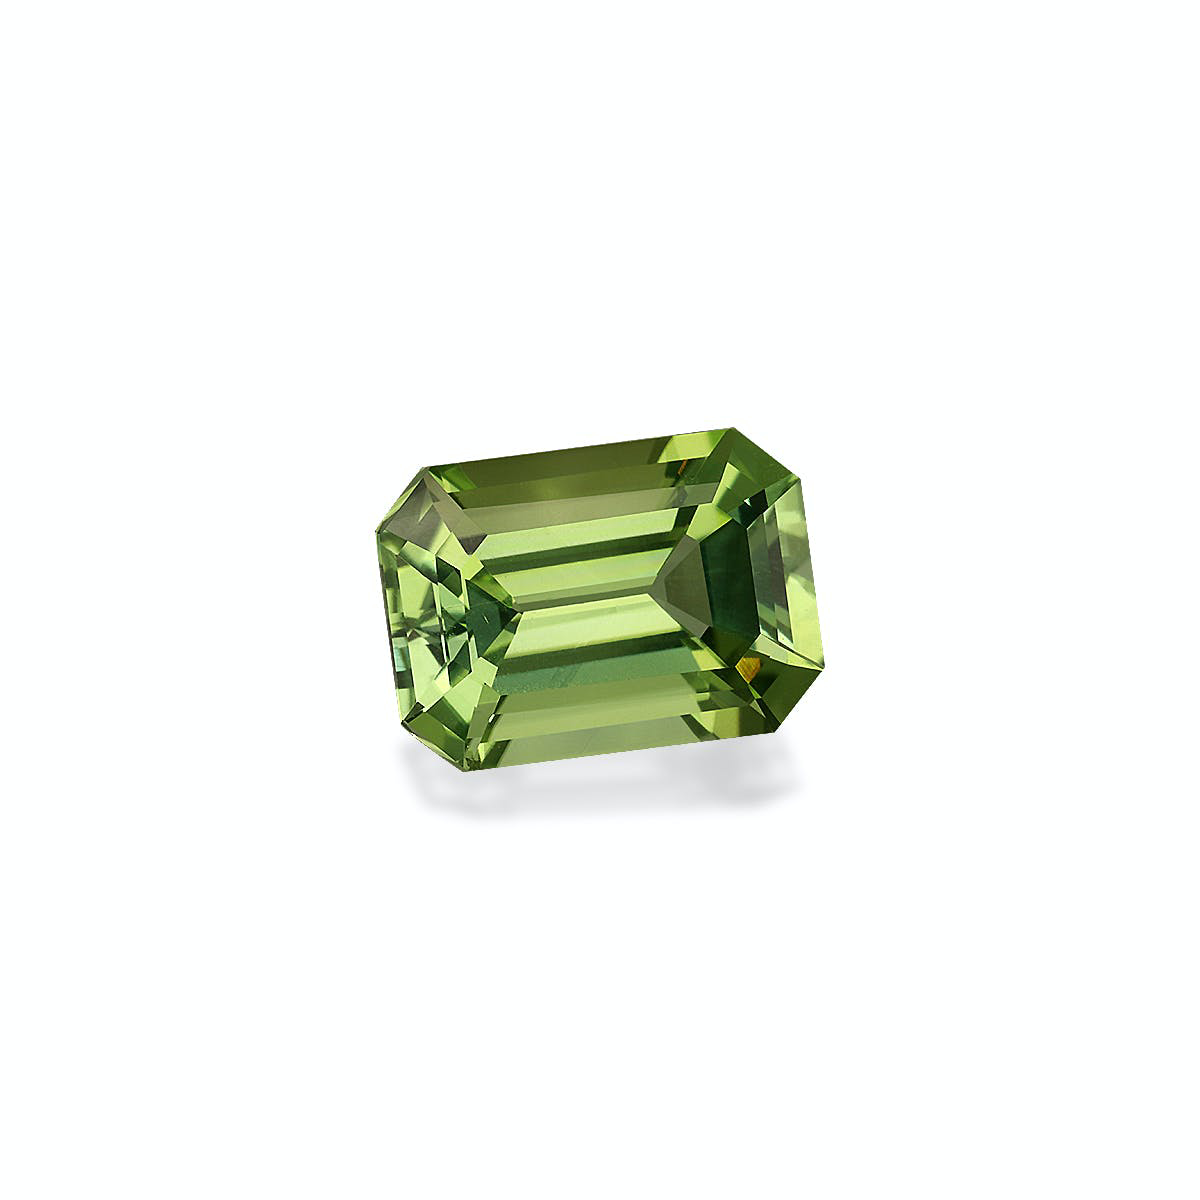 Picture of Lime Green Tourmaline 10.02ct (TG1295)